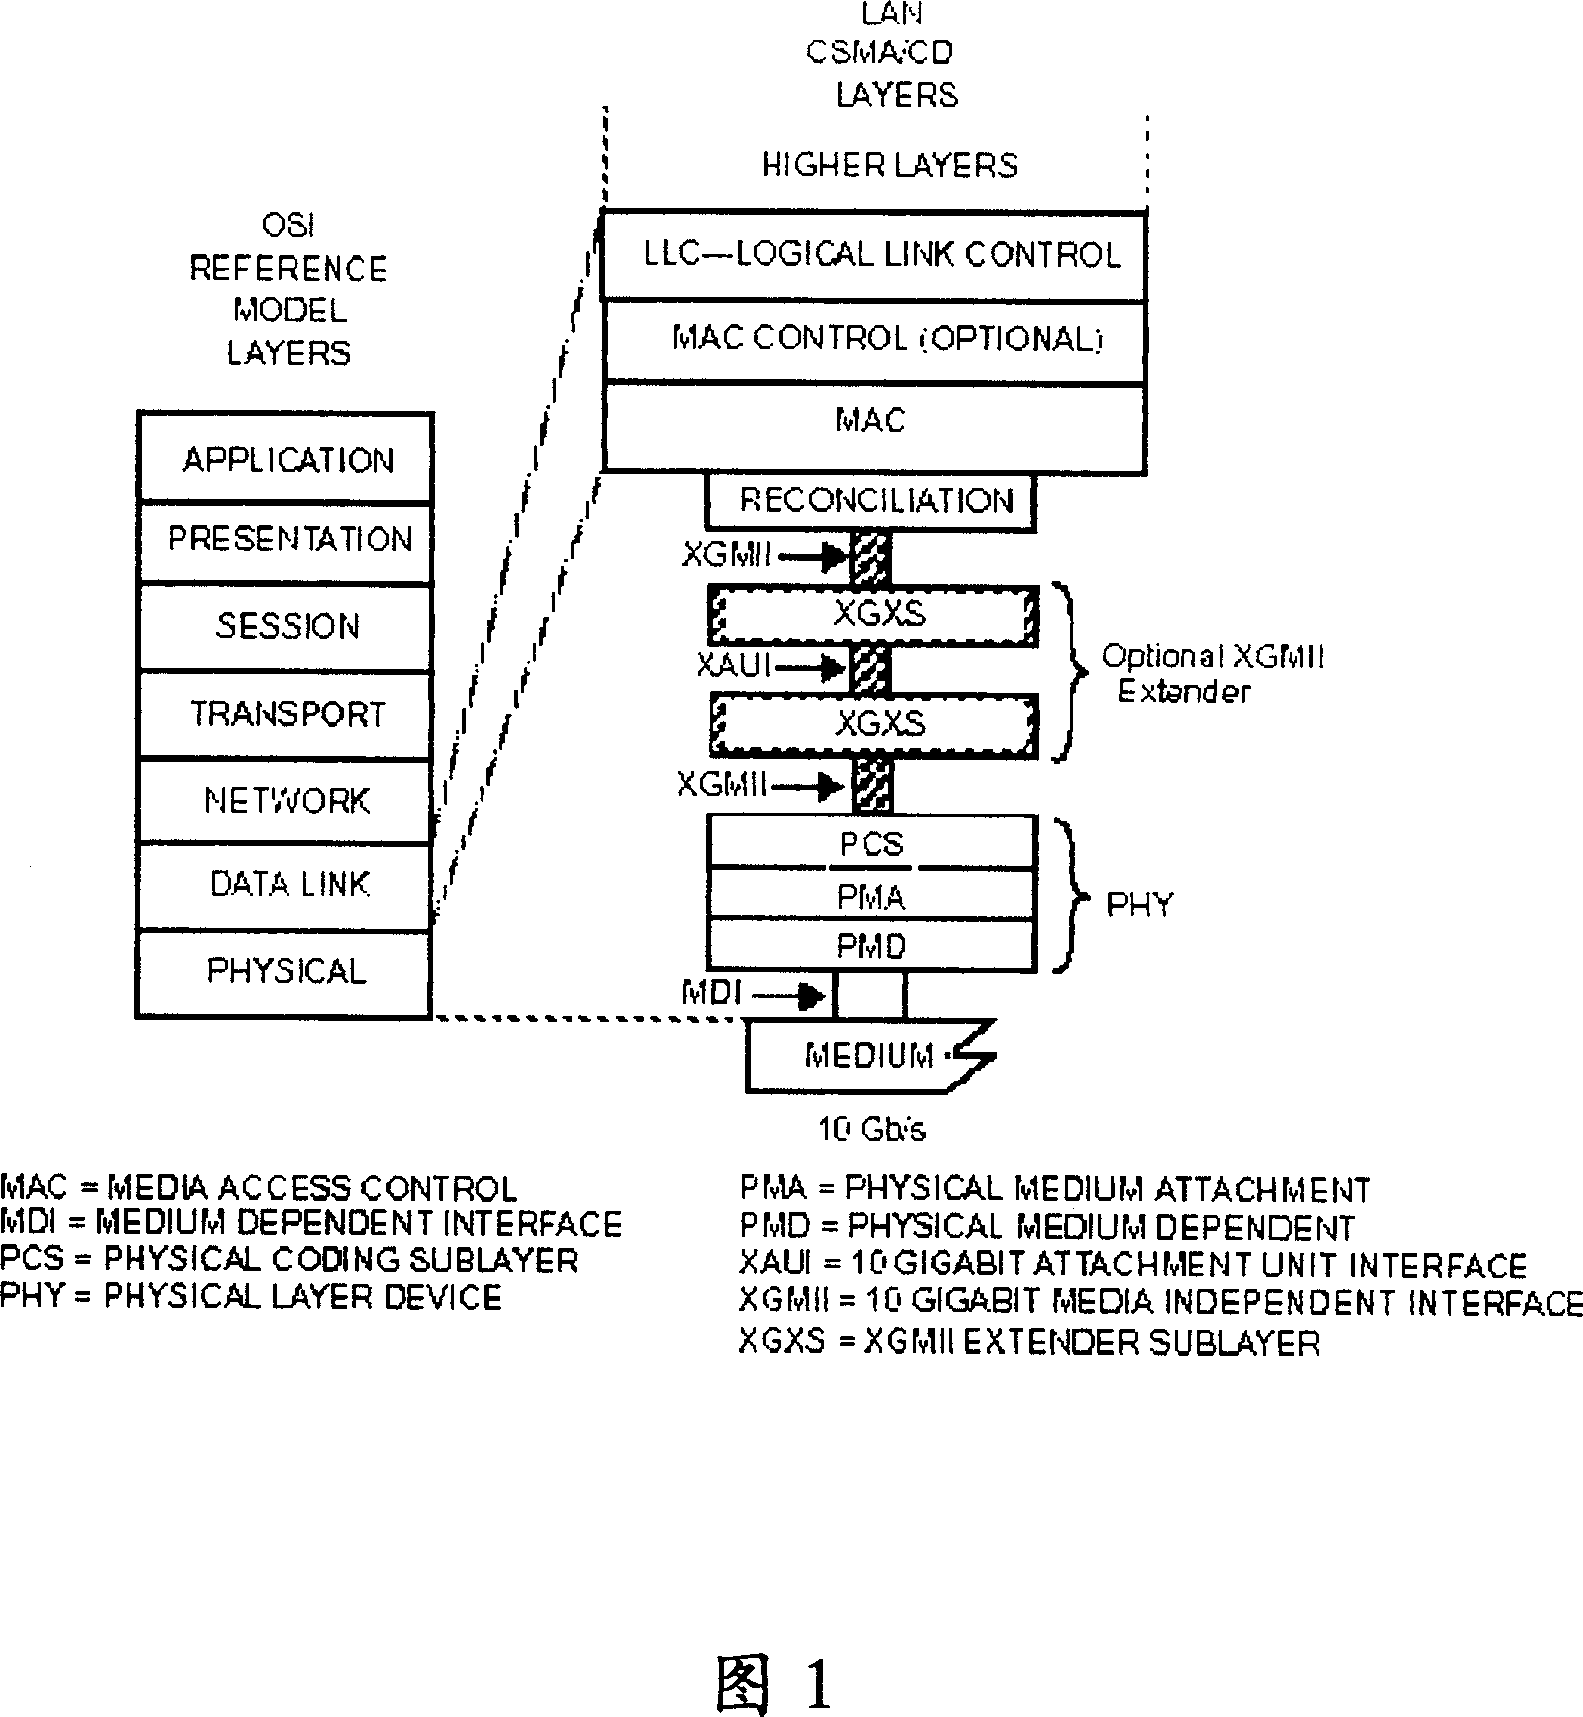 An apparatus for implementing disaster recovery of 10G Ethernet port